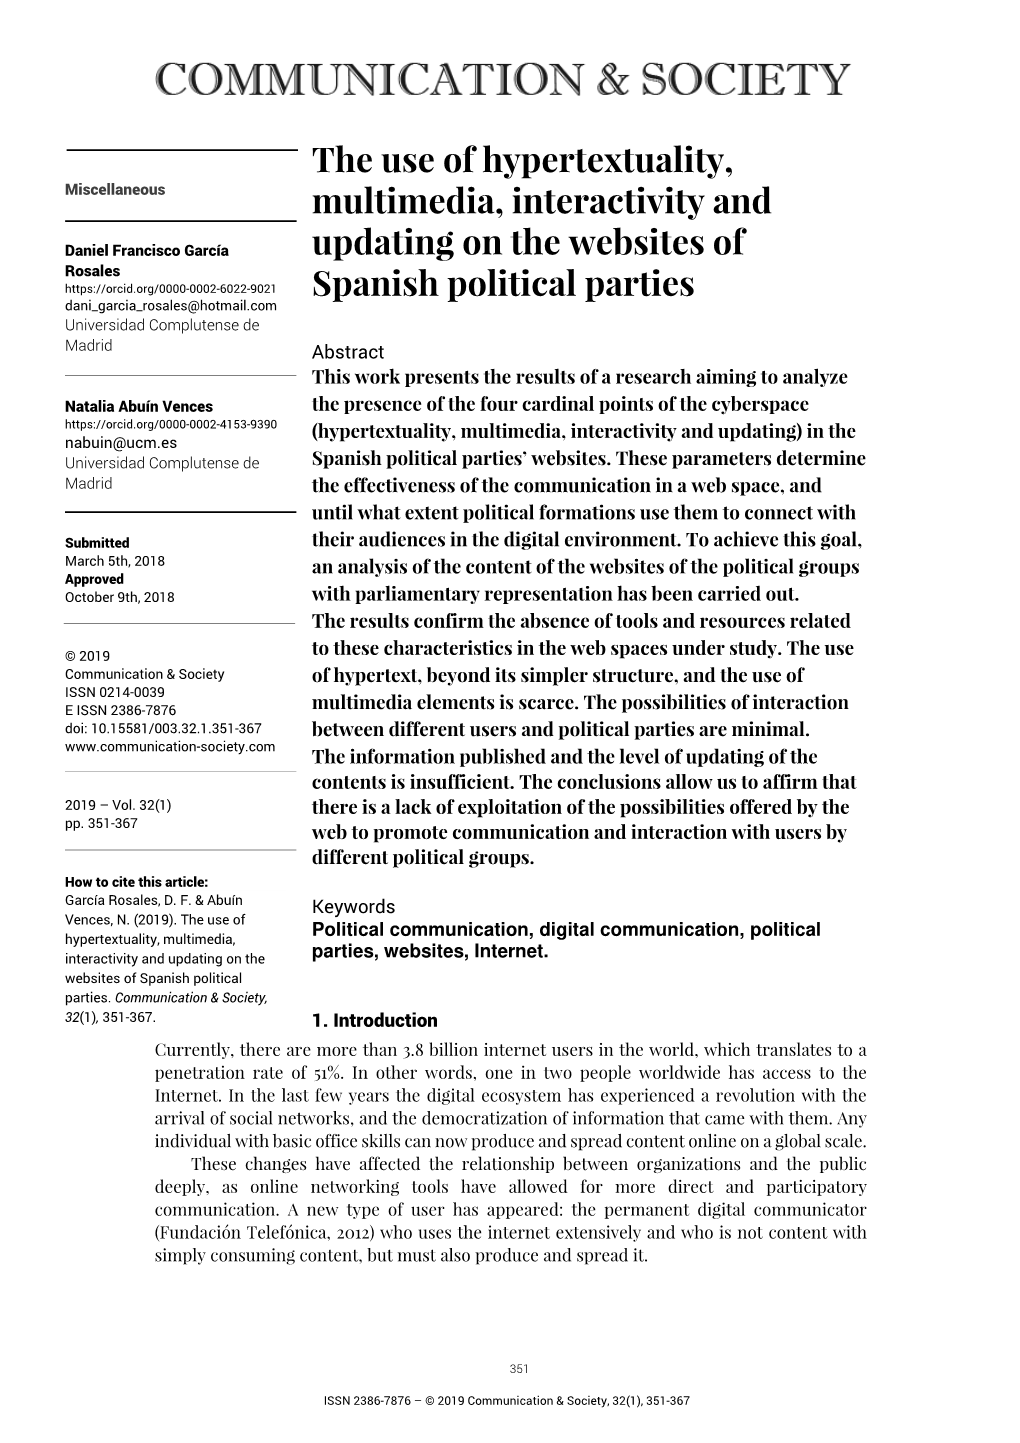 The Use of Hypertextuality, Multimedia, Interactivity and Updating on the Websites of Spanish Political Parties